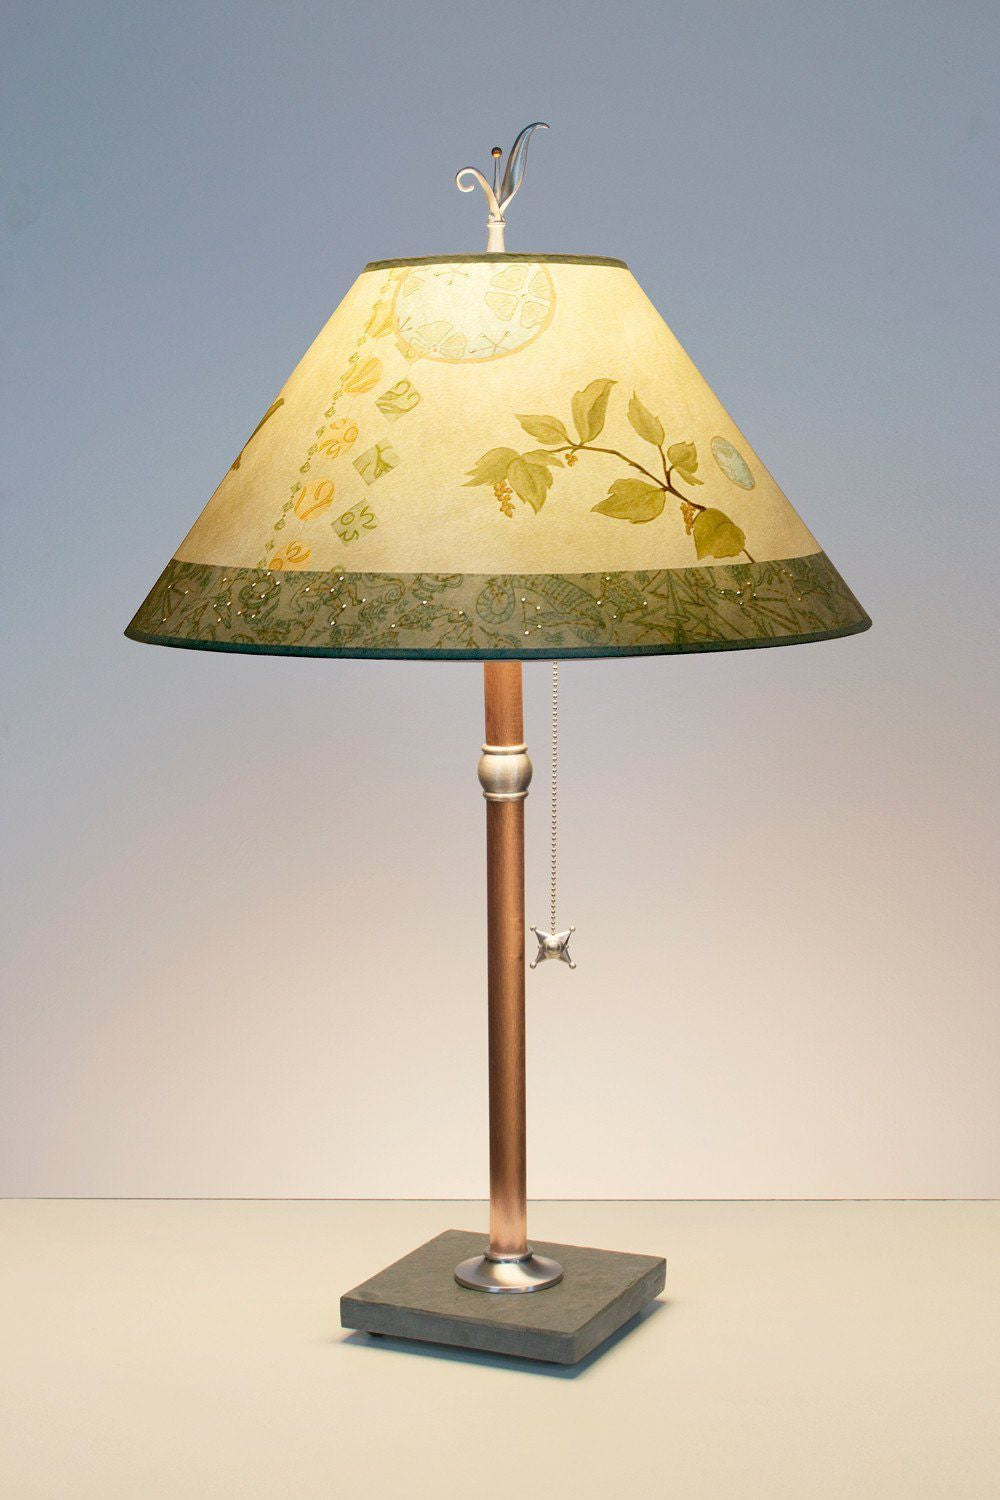 Janna Ugone & Co Table Lamps Copper Table Lamp with Large Conical Shade in Celestial Leaf